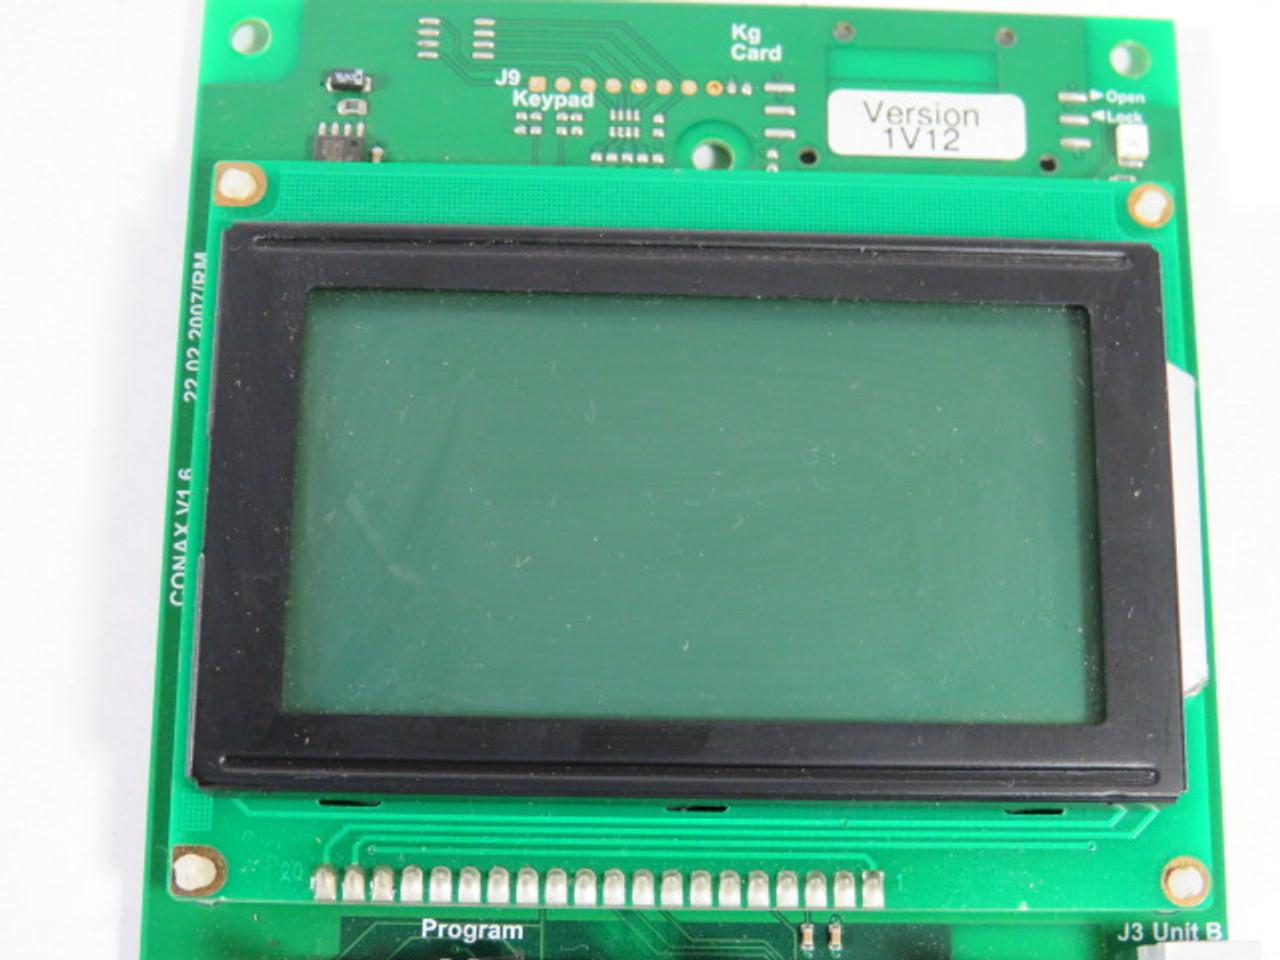 Nortec 2521277 PCB Processor W/ Built-In LCD Display USED